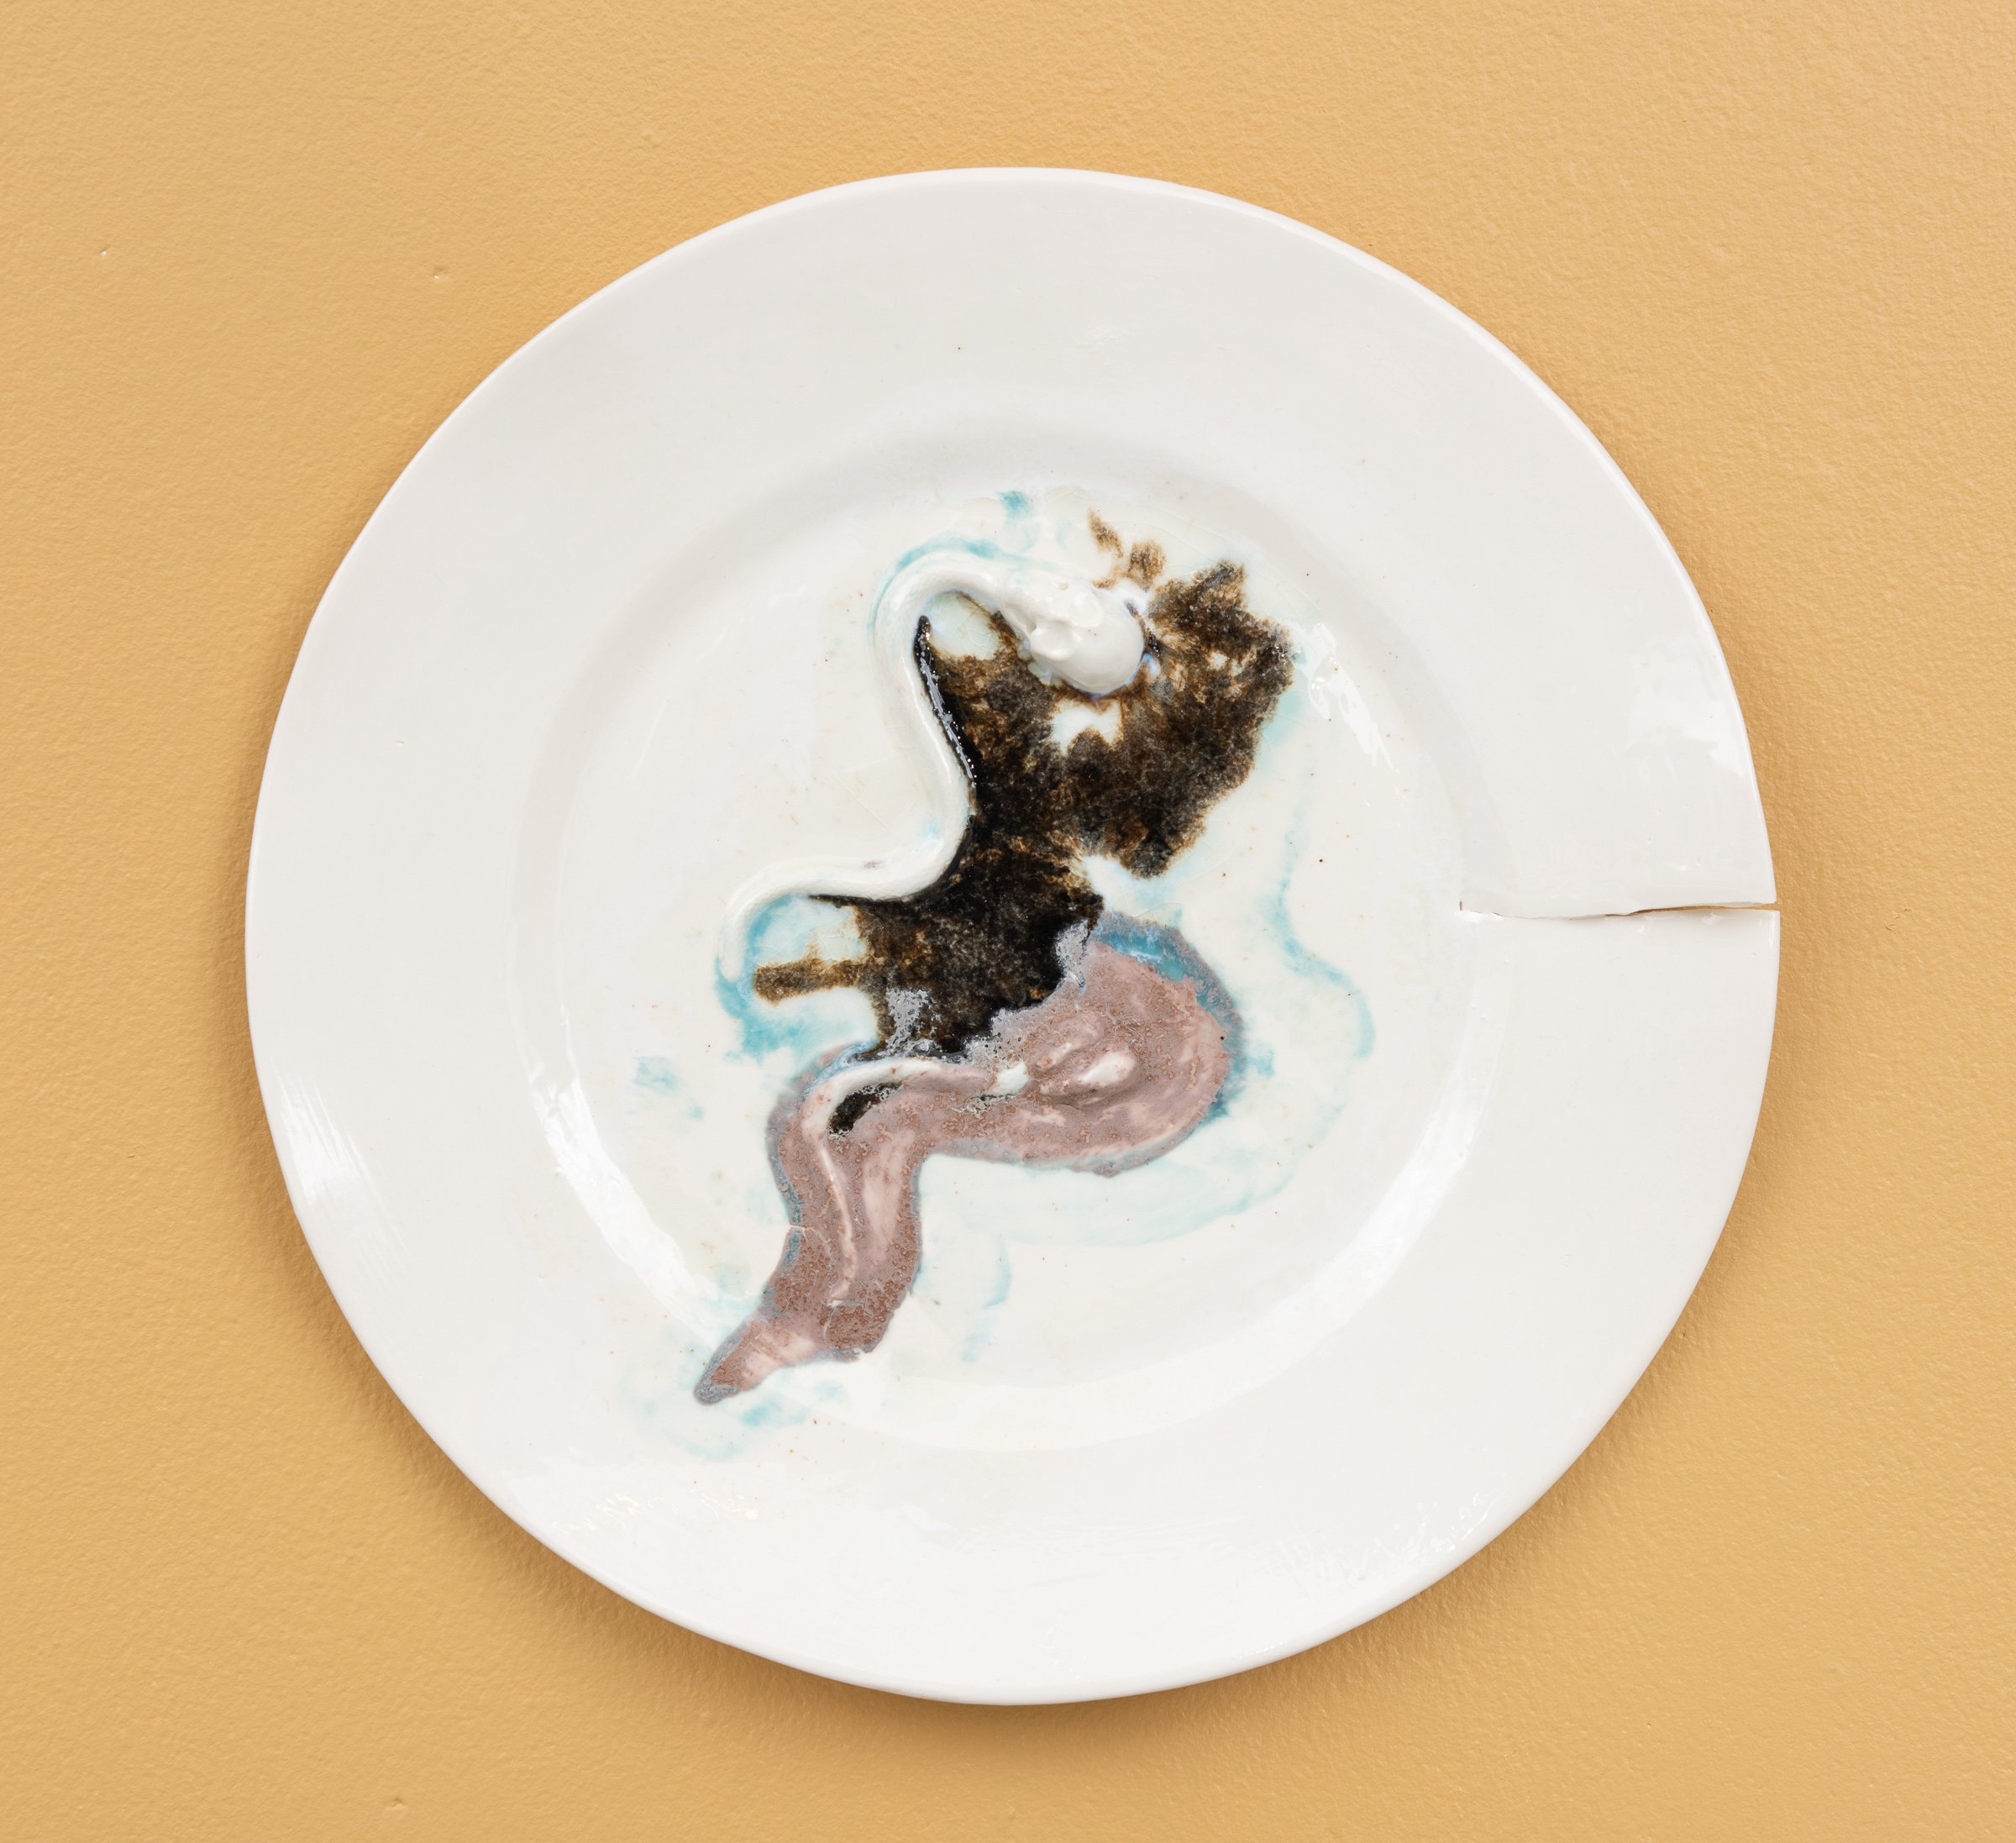  Why do Europeans put plates on their walls? V | 2022  Porcelain, glazes, porcelain decals and tissue paper, press molding. 35x35x3cm  Photo: Thomas Tveter 